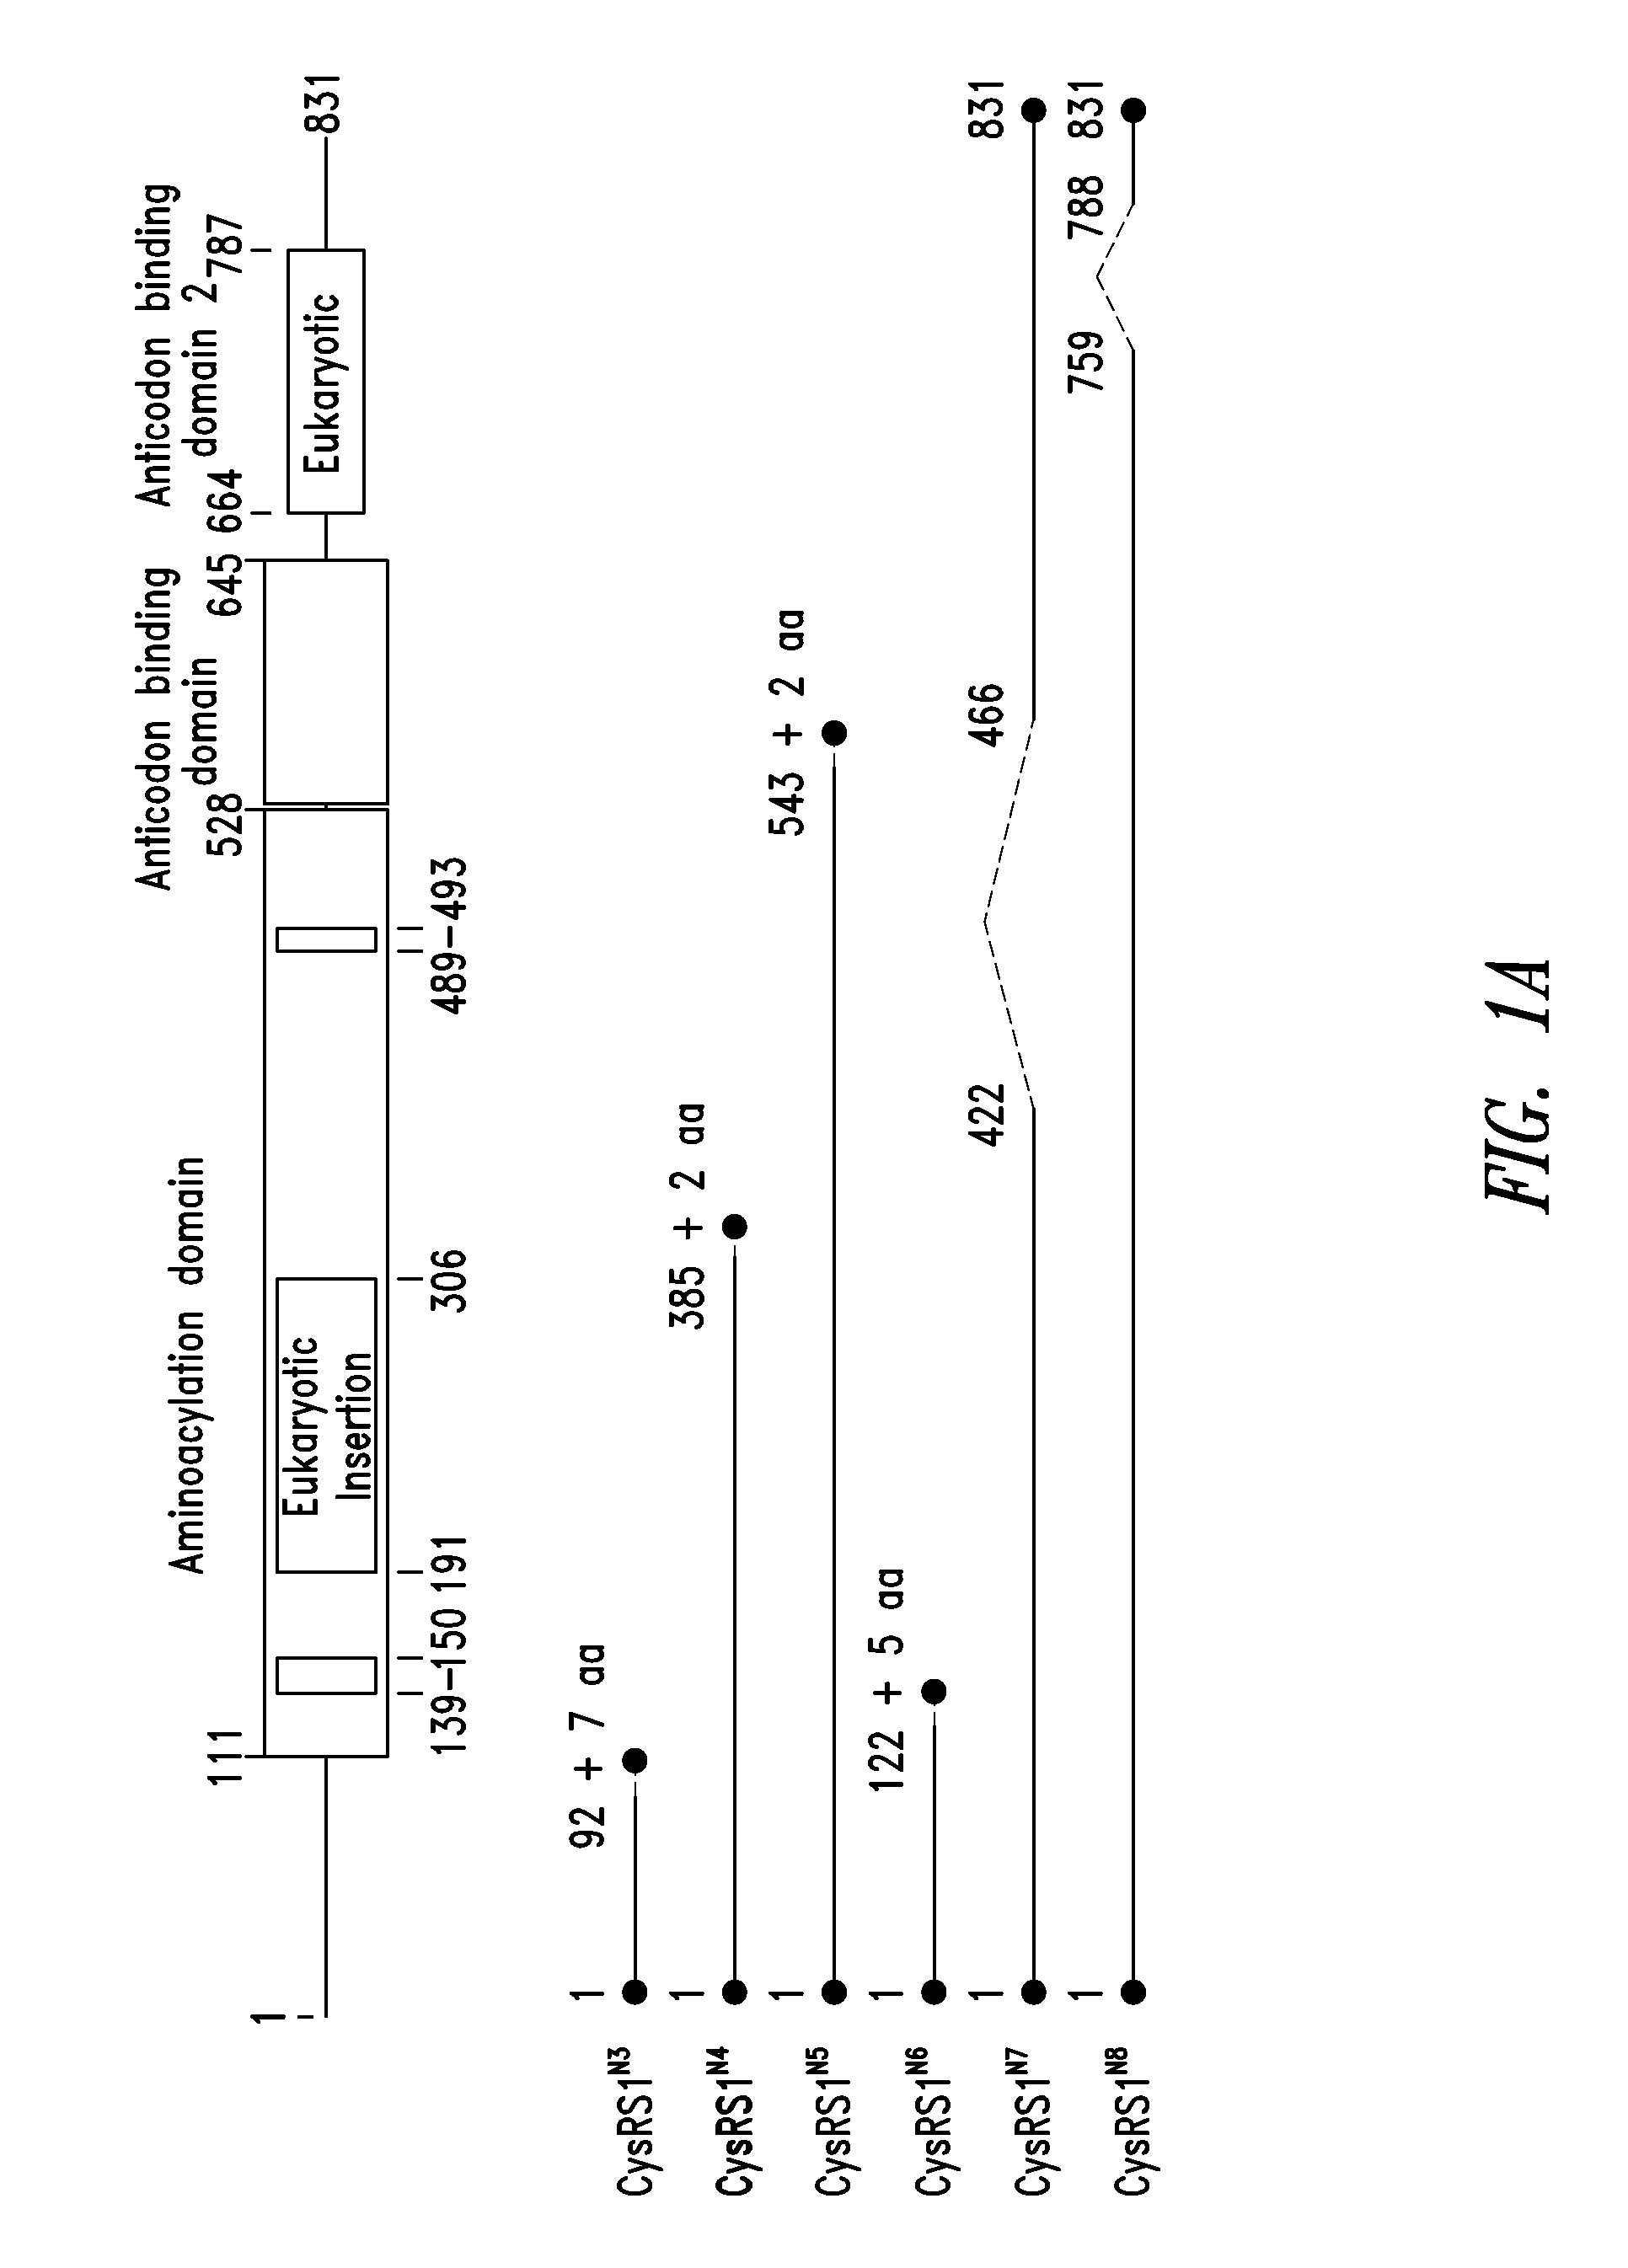 INNOVATIVE DISCOVERY OF THERAPEUTIC, DIAGNOSTIC, AND ANTIBODY COMPOSITIONS RELATED TO PROTEIN FRAGMENTS OF CYSTEINYL-tRNA SYNTHETASE